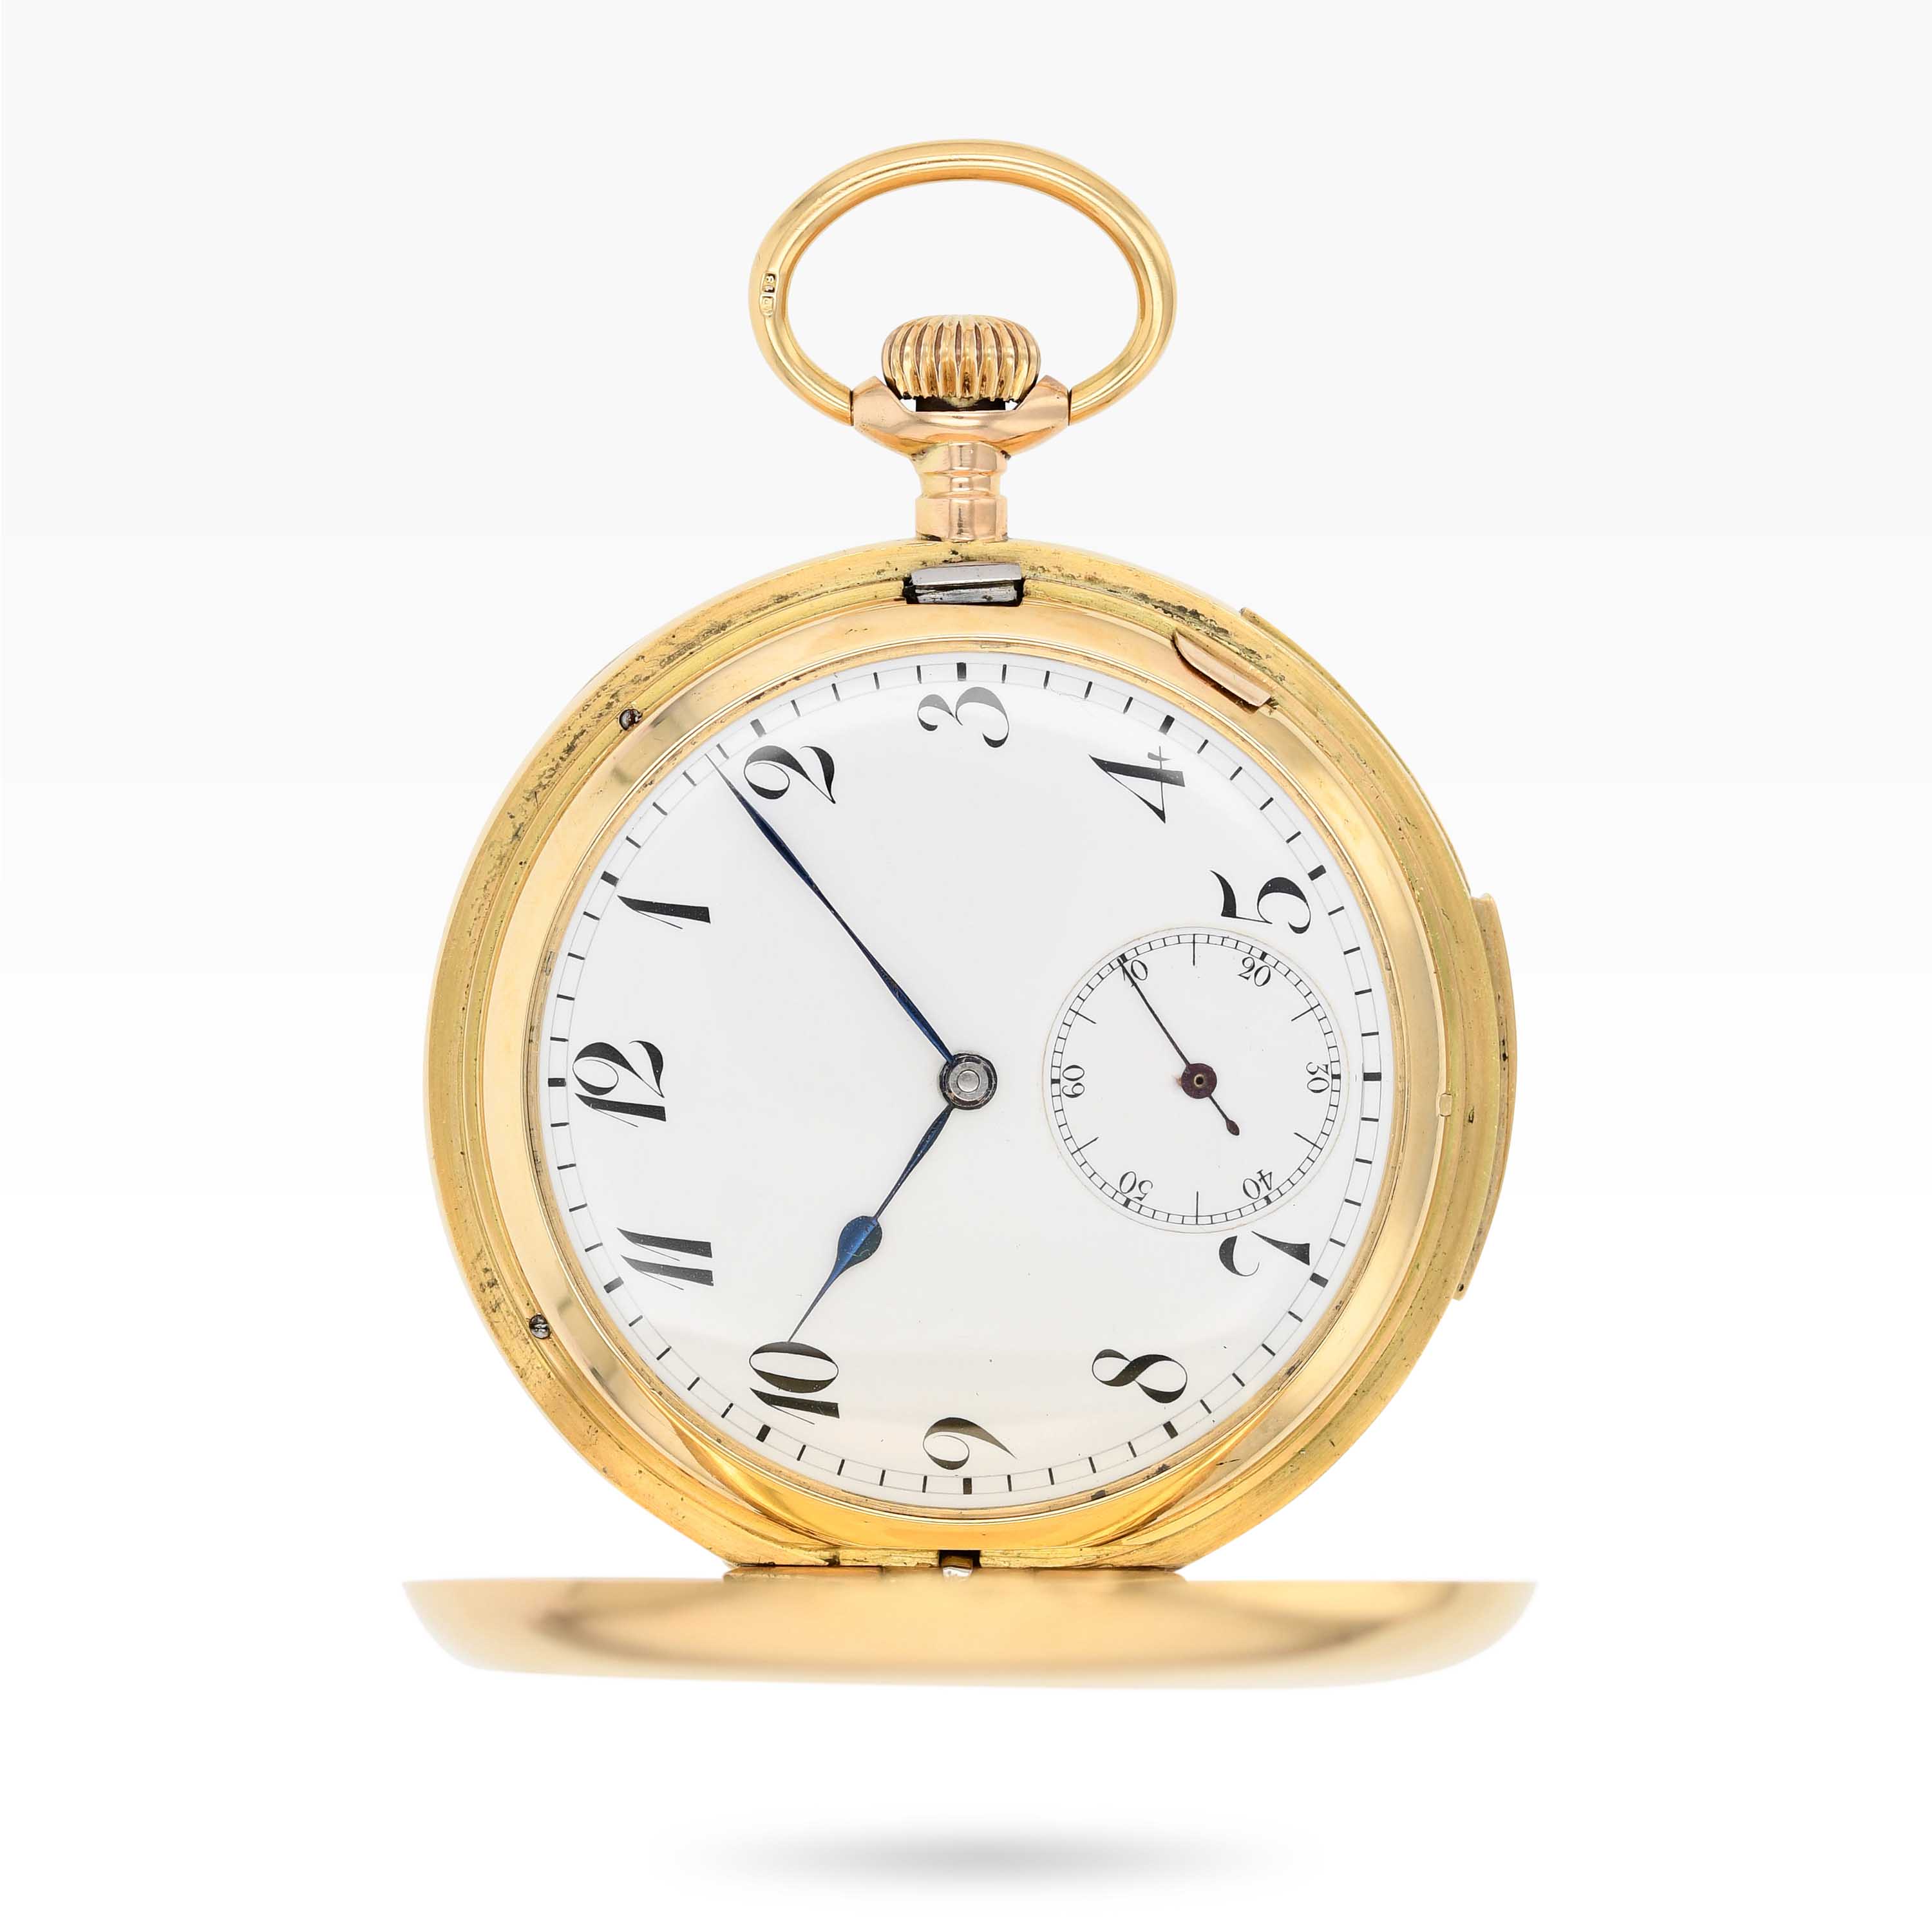 1268PW1 Barbezat-Bôle Le Loche Yellow Gold Minute Repeater Pocket Watch img-main1